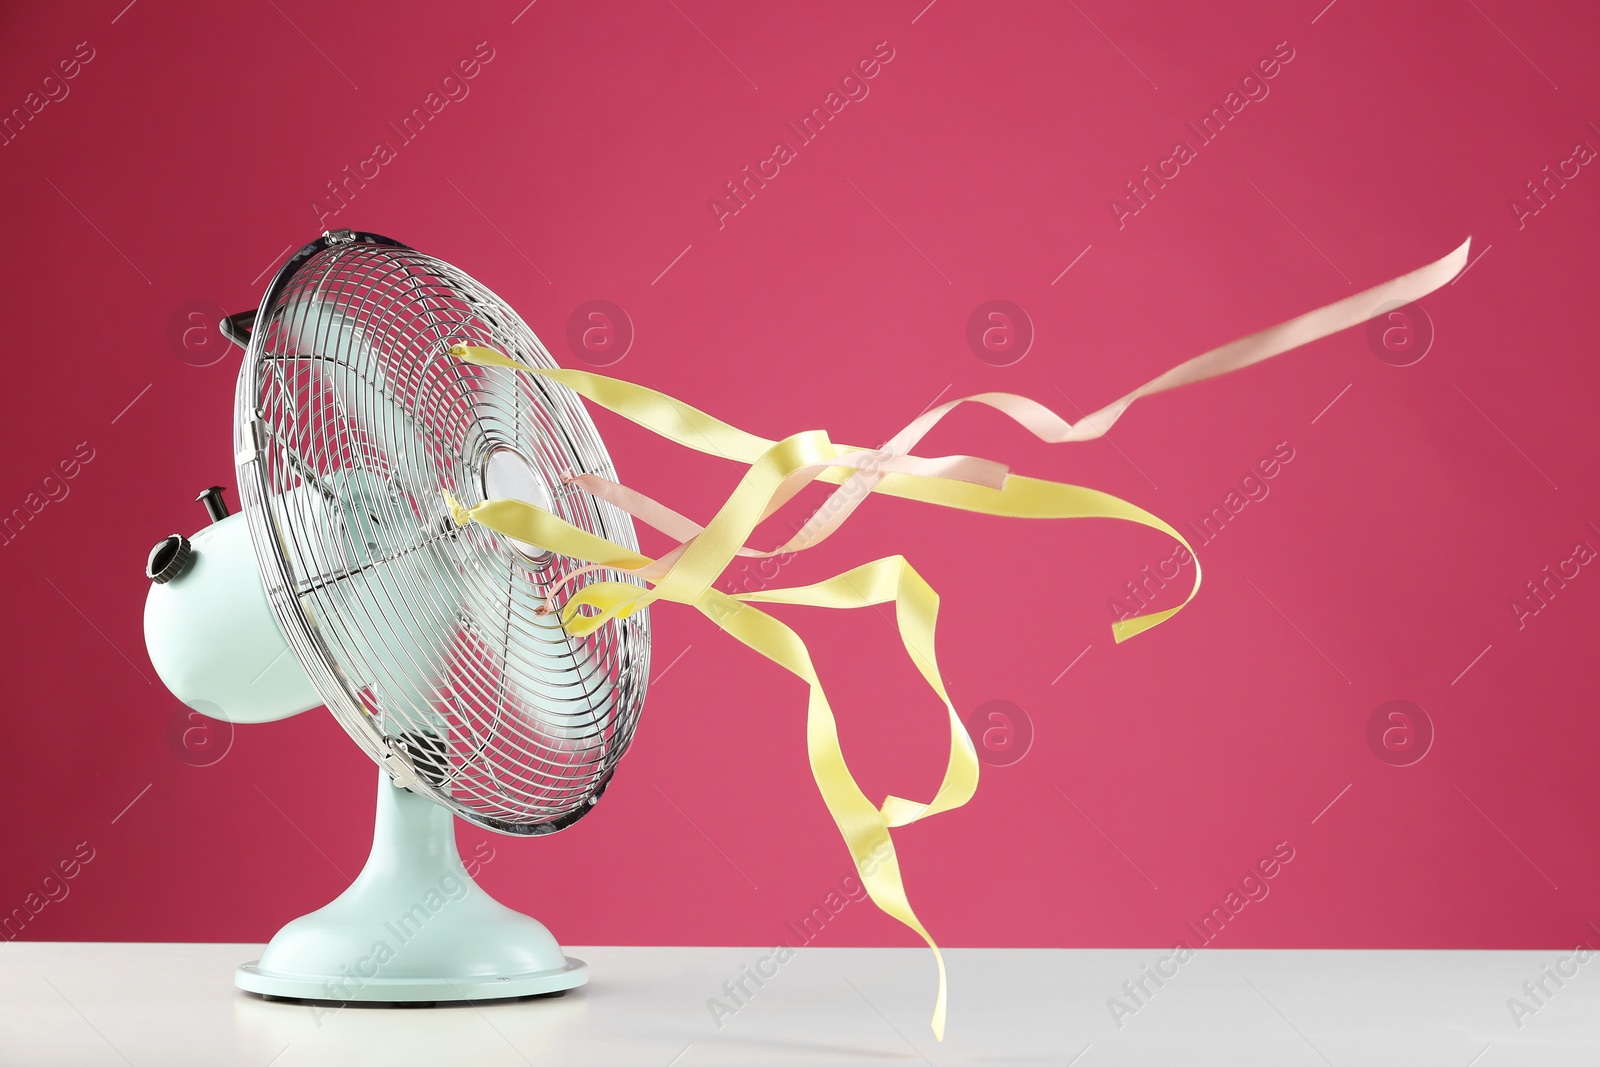 Photo of Electric fan on white table against pink background. Summer heat